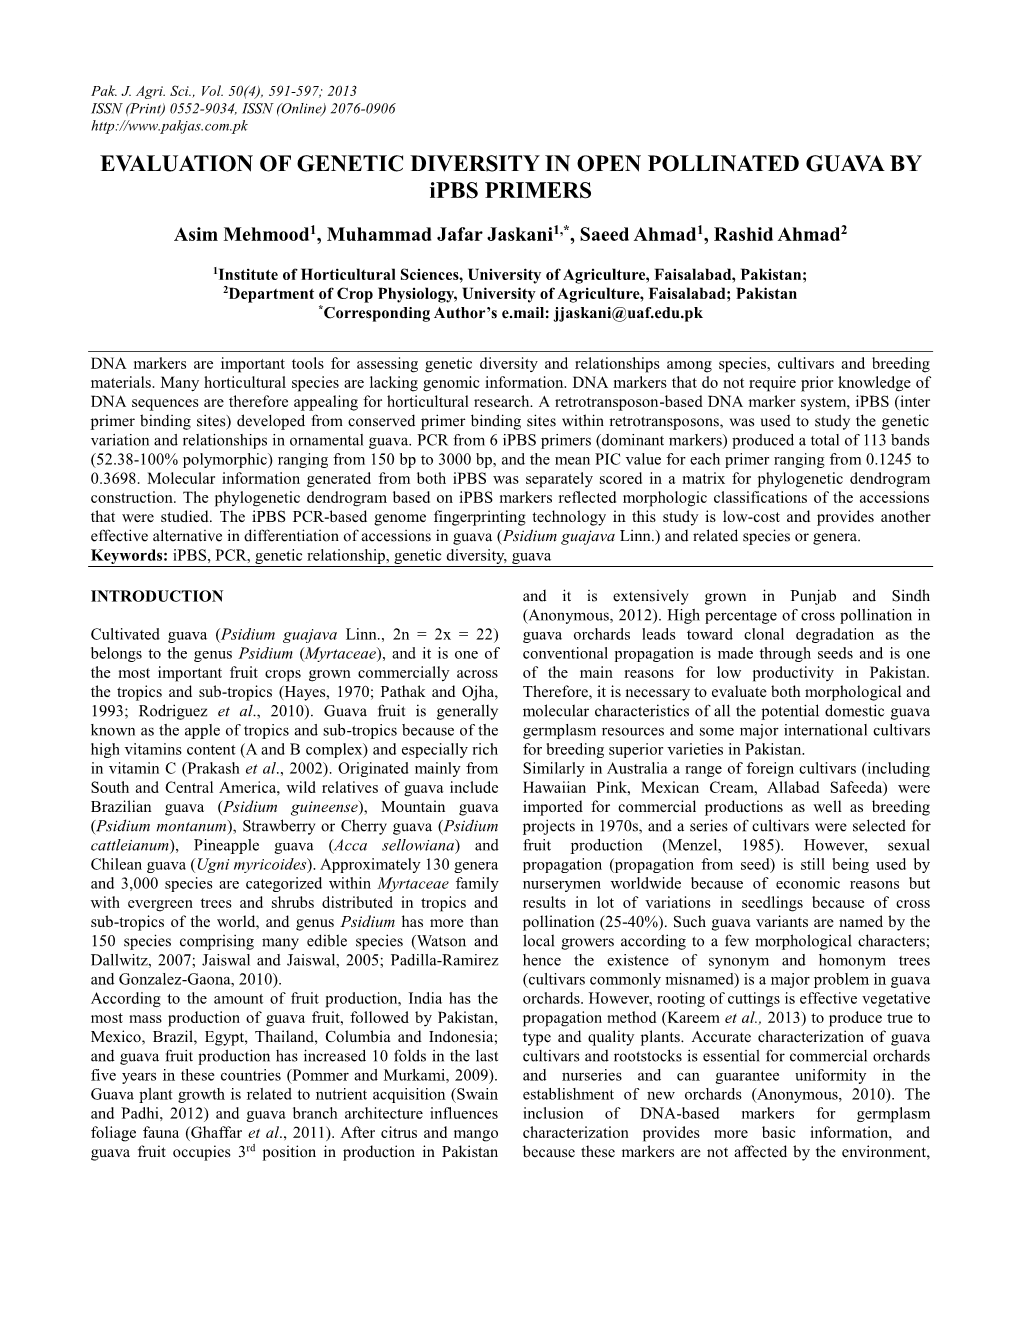 EVALUATION of GENETIC DIVERSITY in OPEN POLLINATED GUAVA by Ipbs PRIMERS